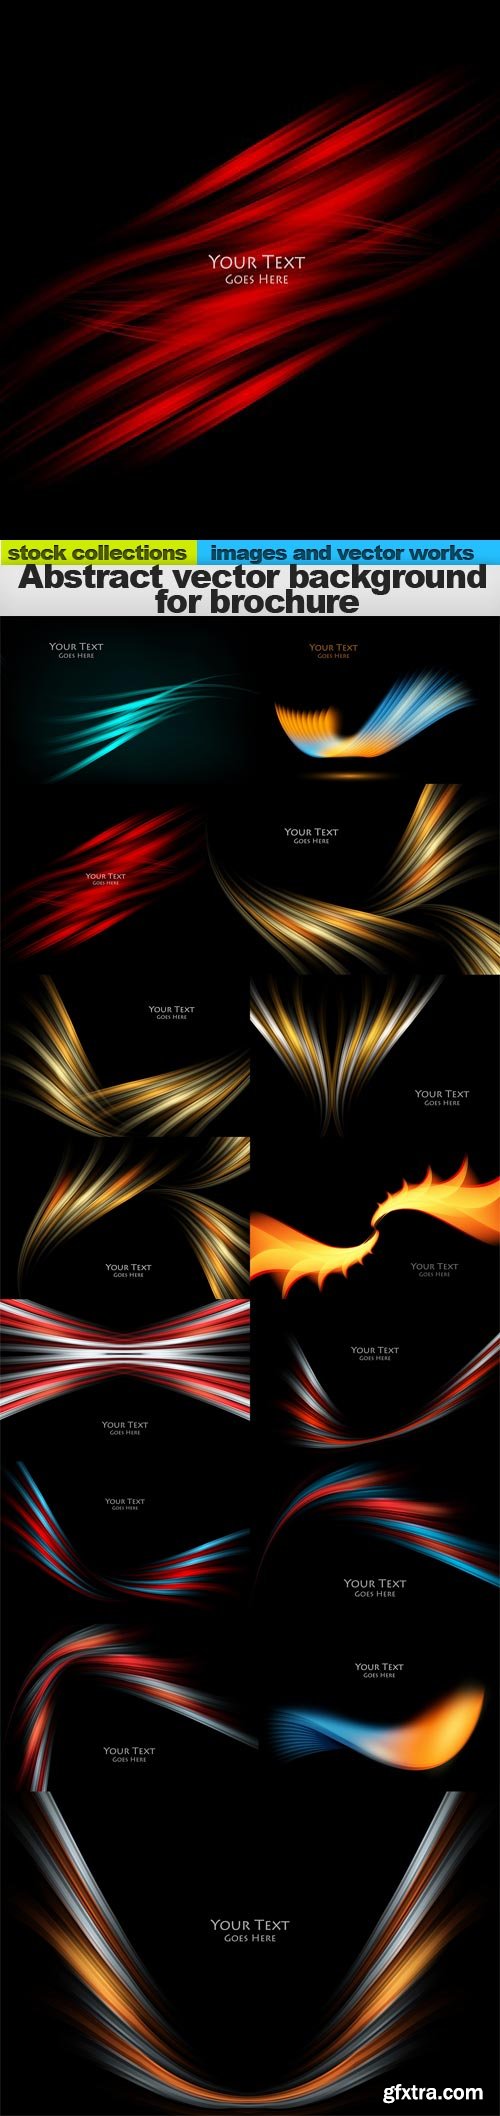 Abstract vector background for brochure, 15 x EPS